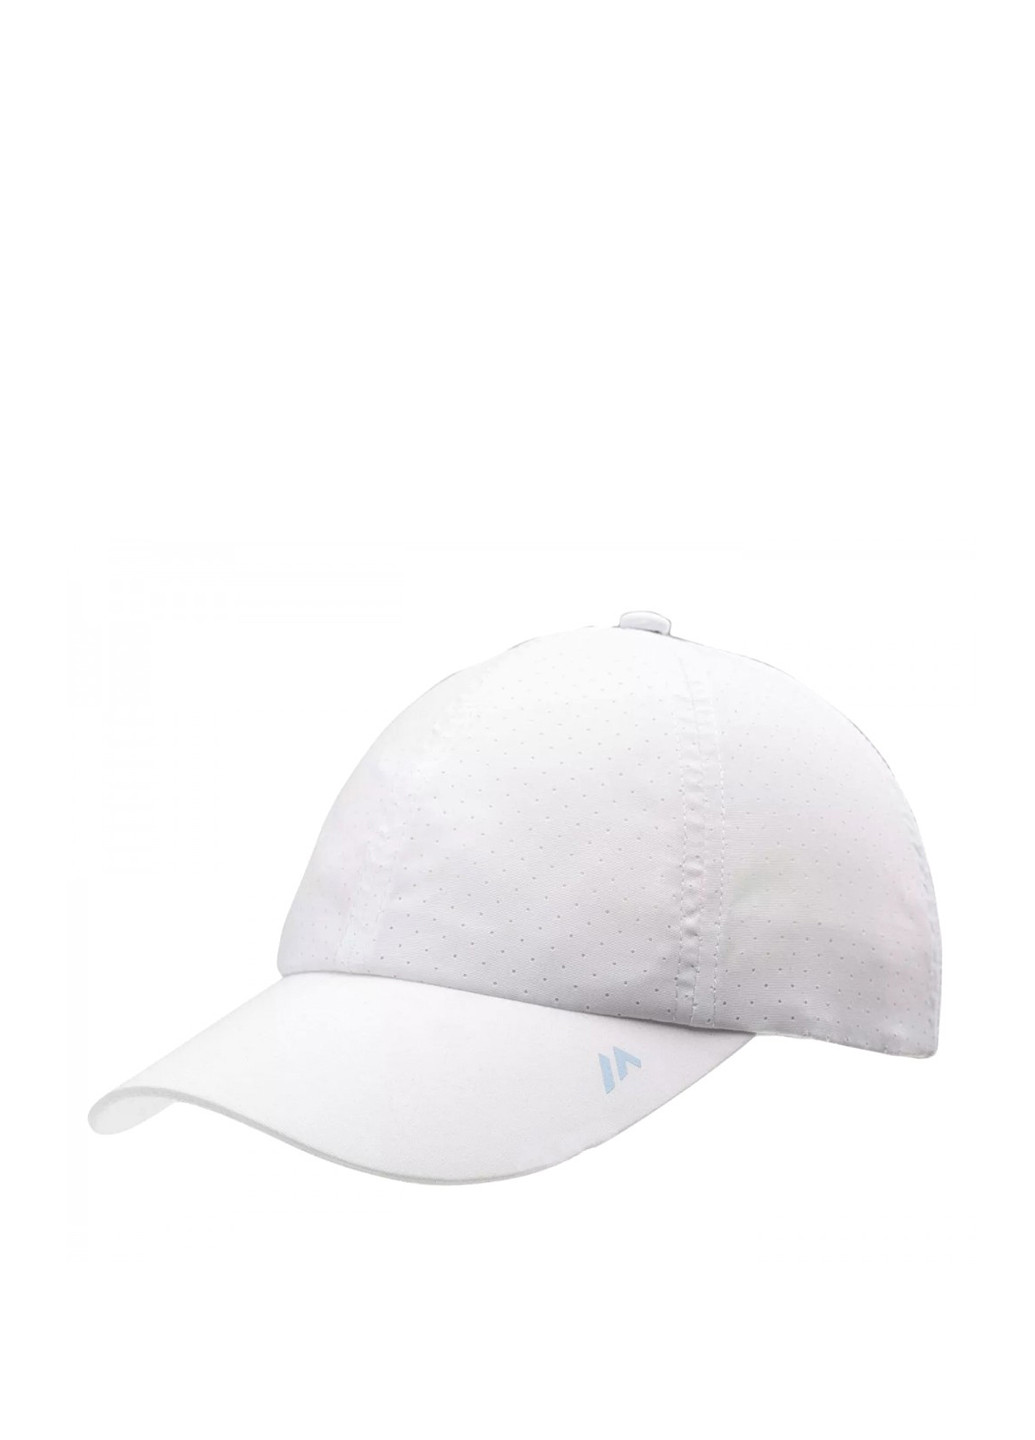 Кепка Martes horst wos-white/cerulean (258602981)